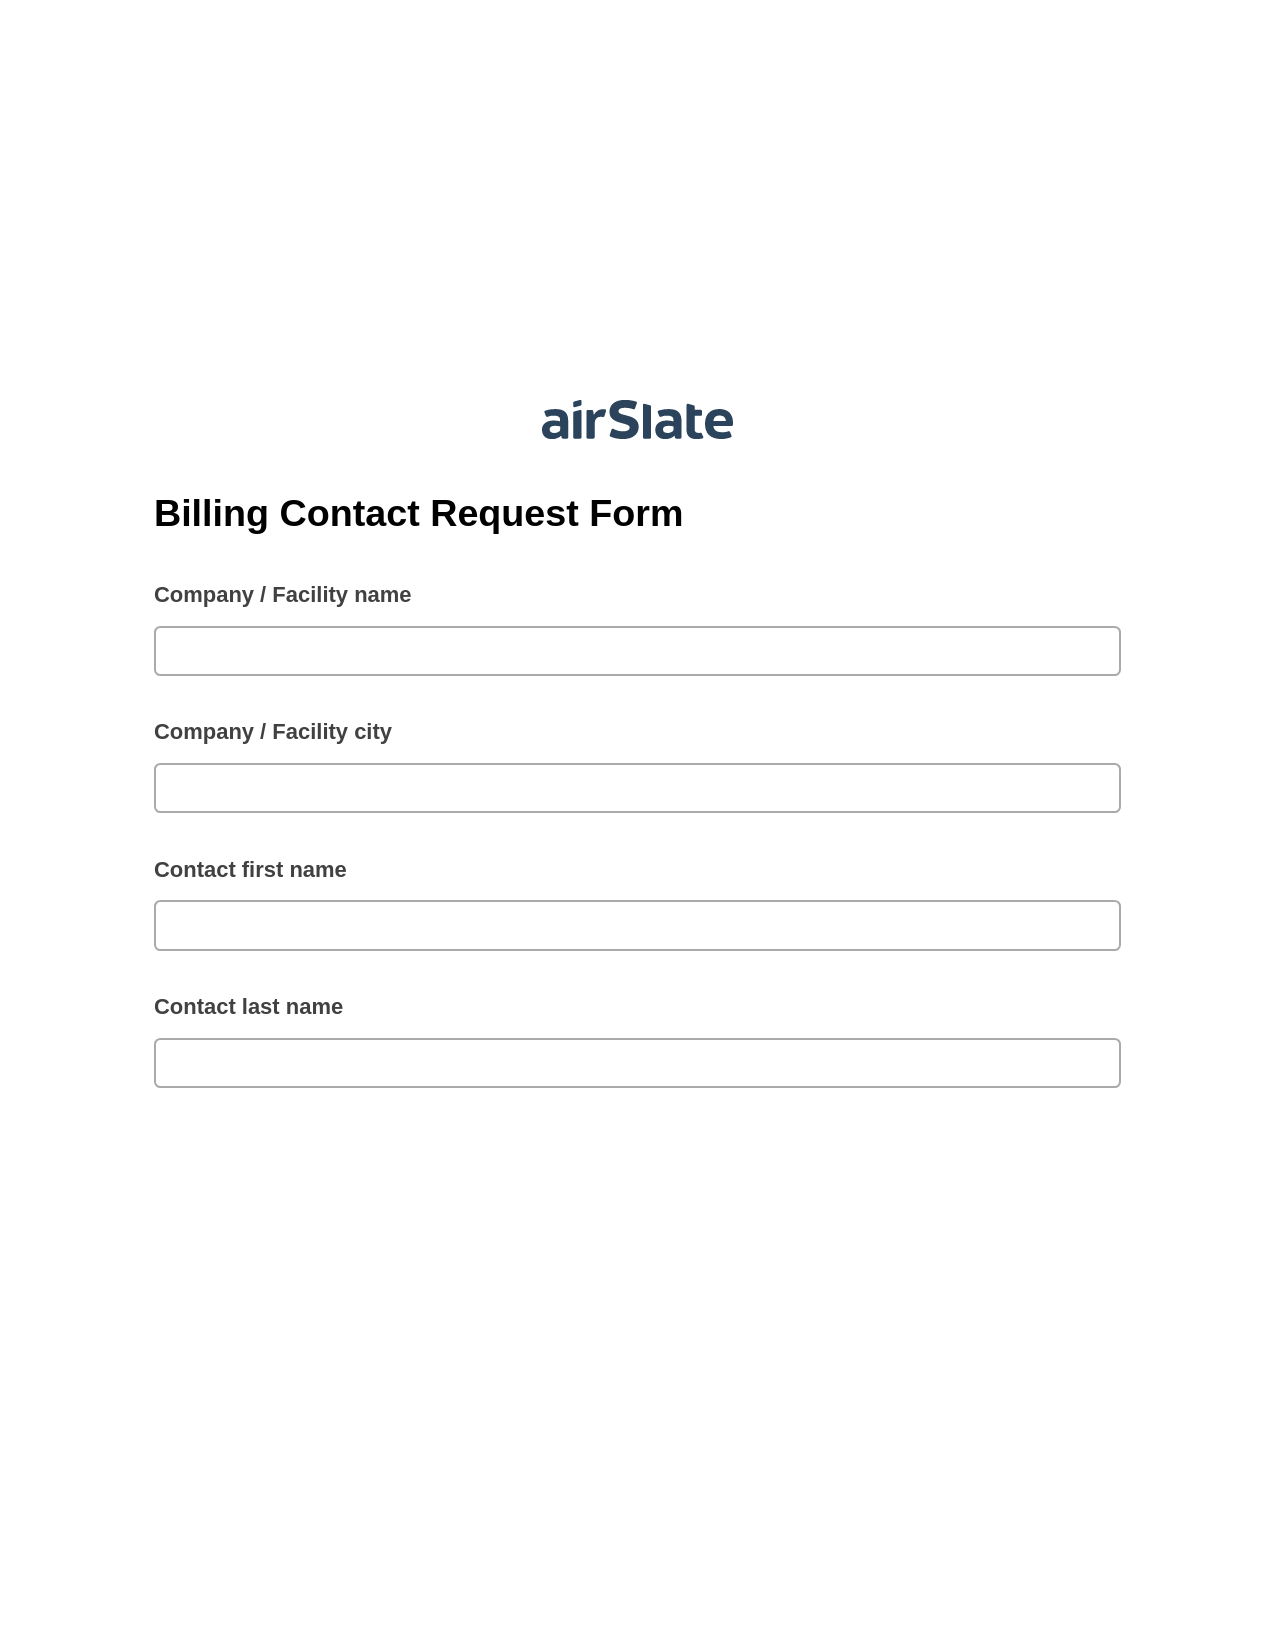 Multirole Billing Contact Request Form Pre-fill from Excel Spreadsheet Bot, Reminder Bot, Archive to SharePoint Folder Bot